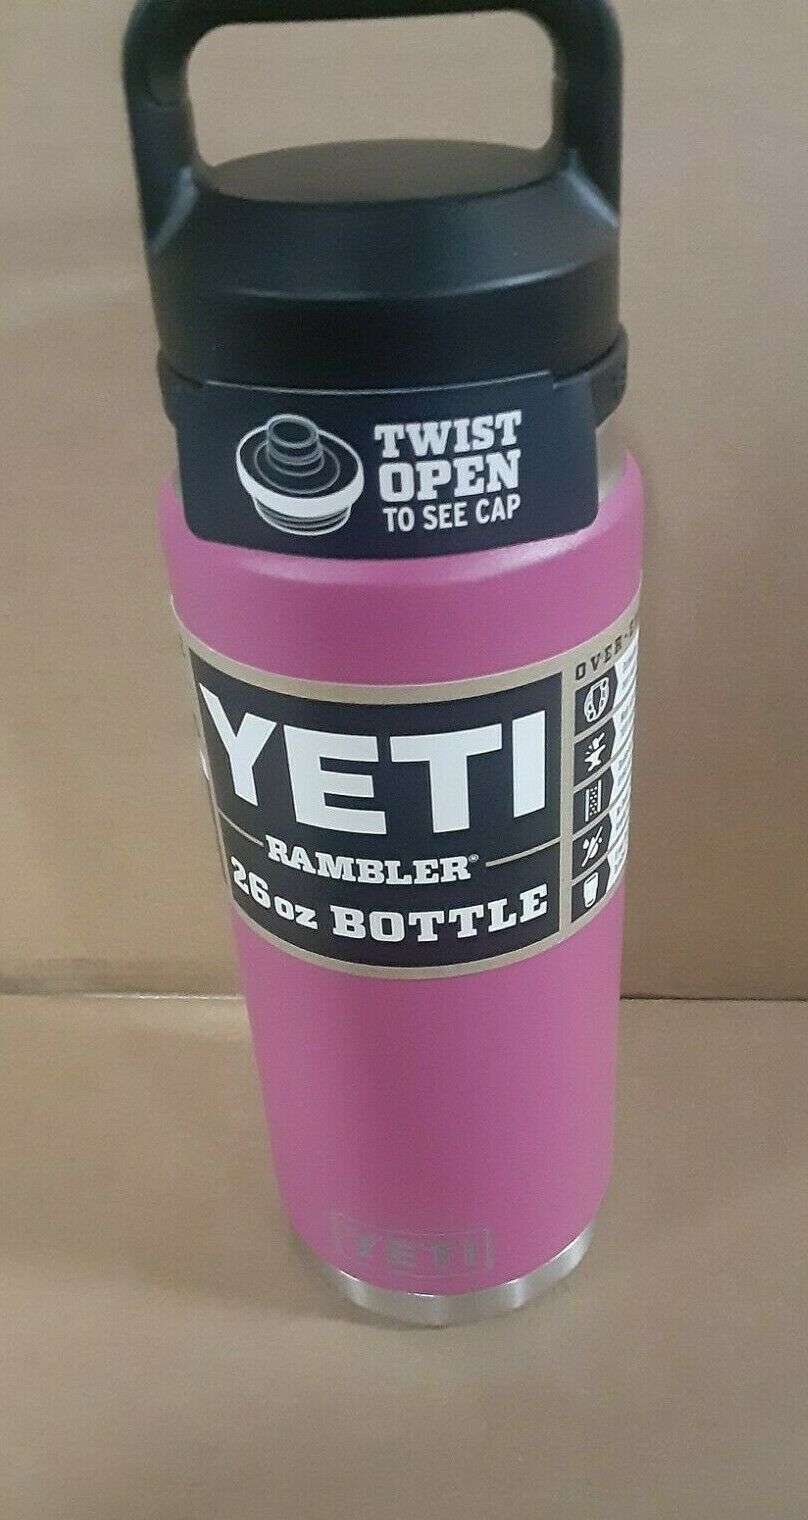 YETI Rambler 26 oz Bottle with Chug Cap - Prickly Pear Pink - Retired Color!